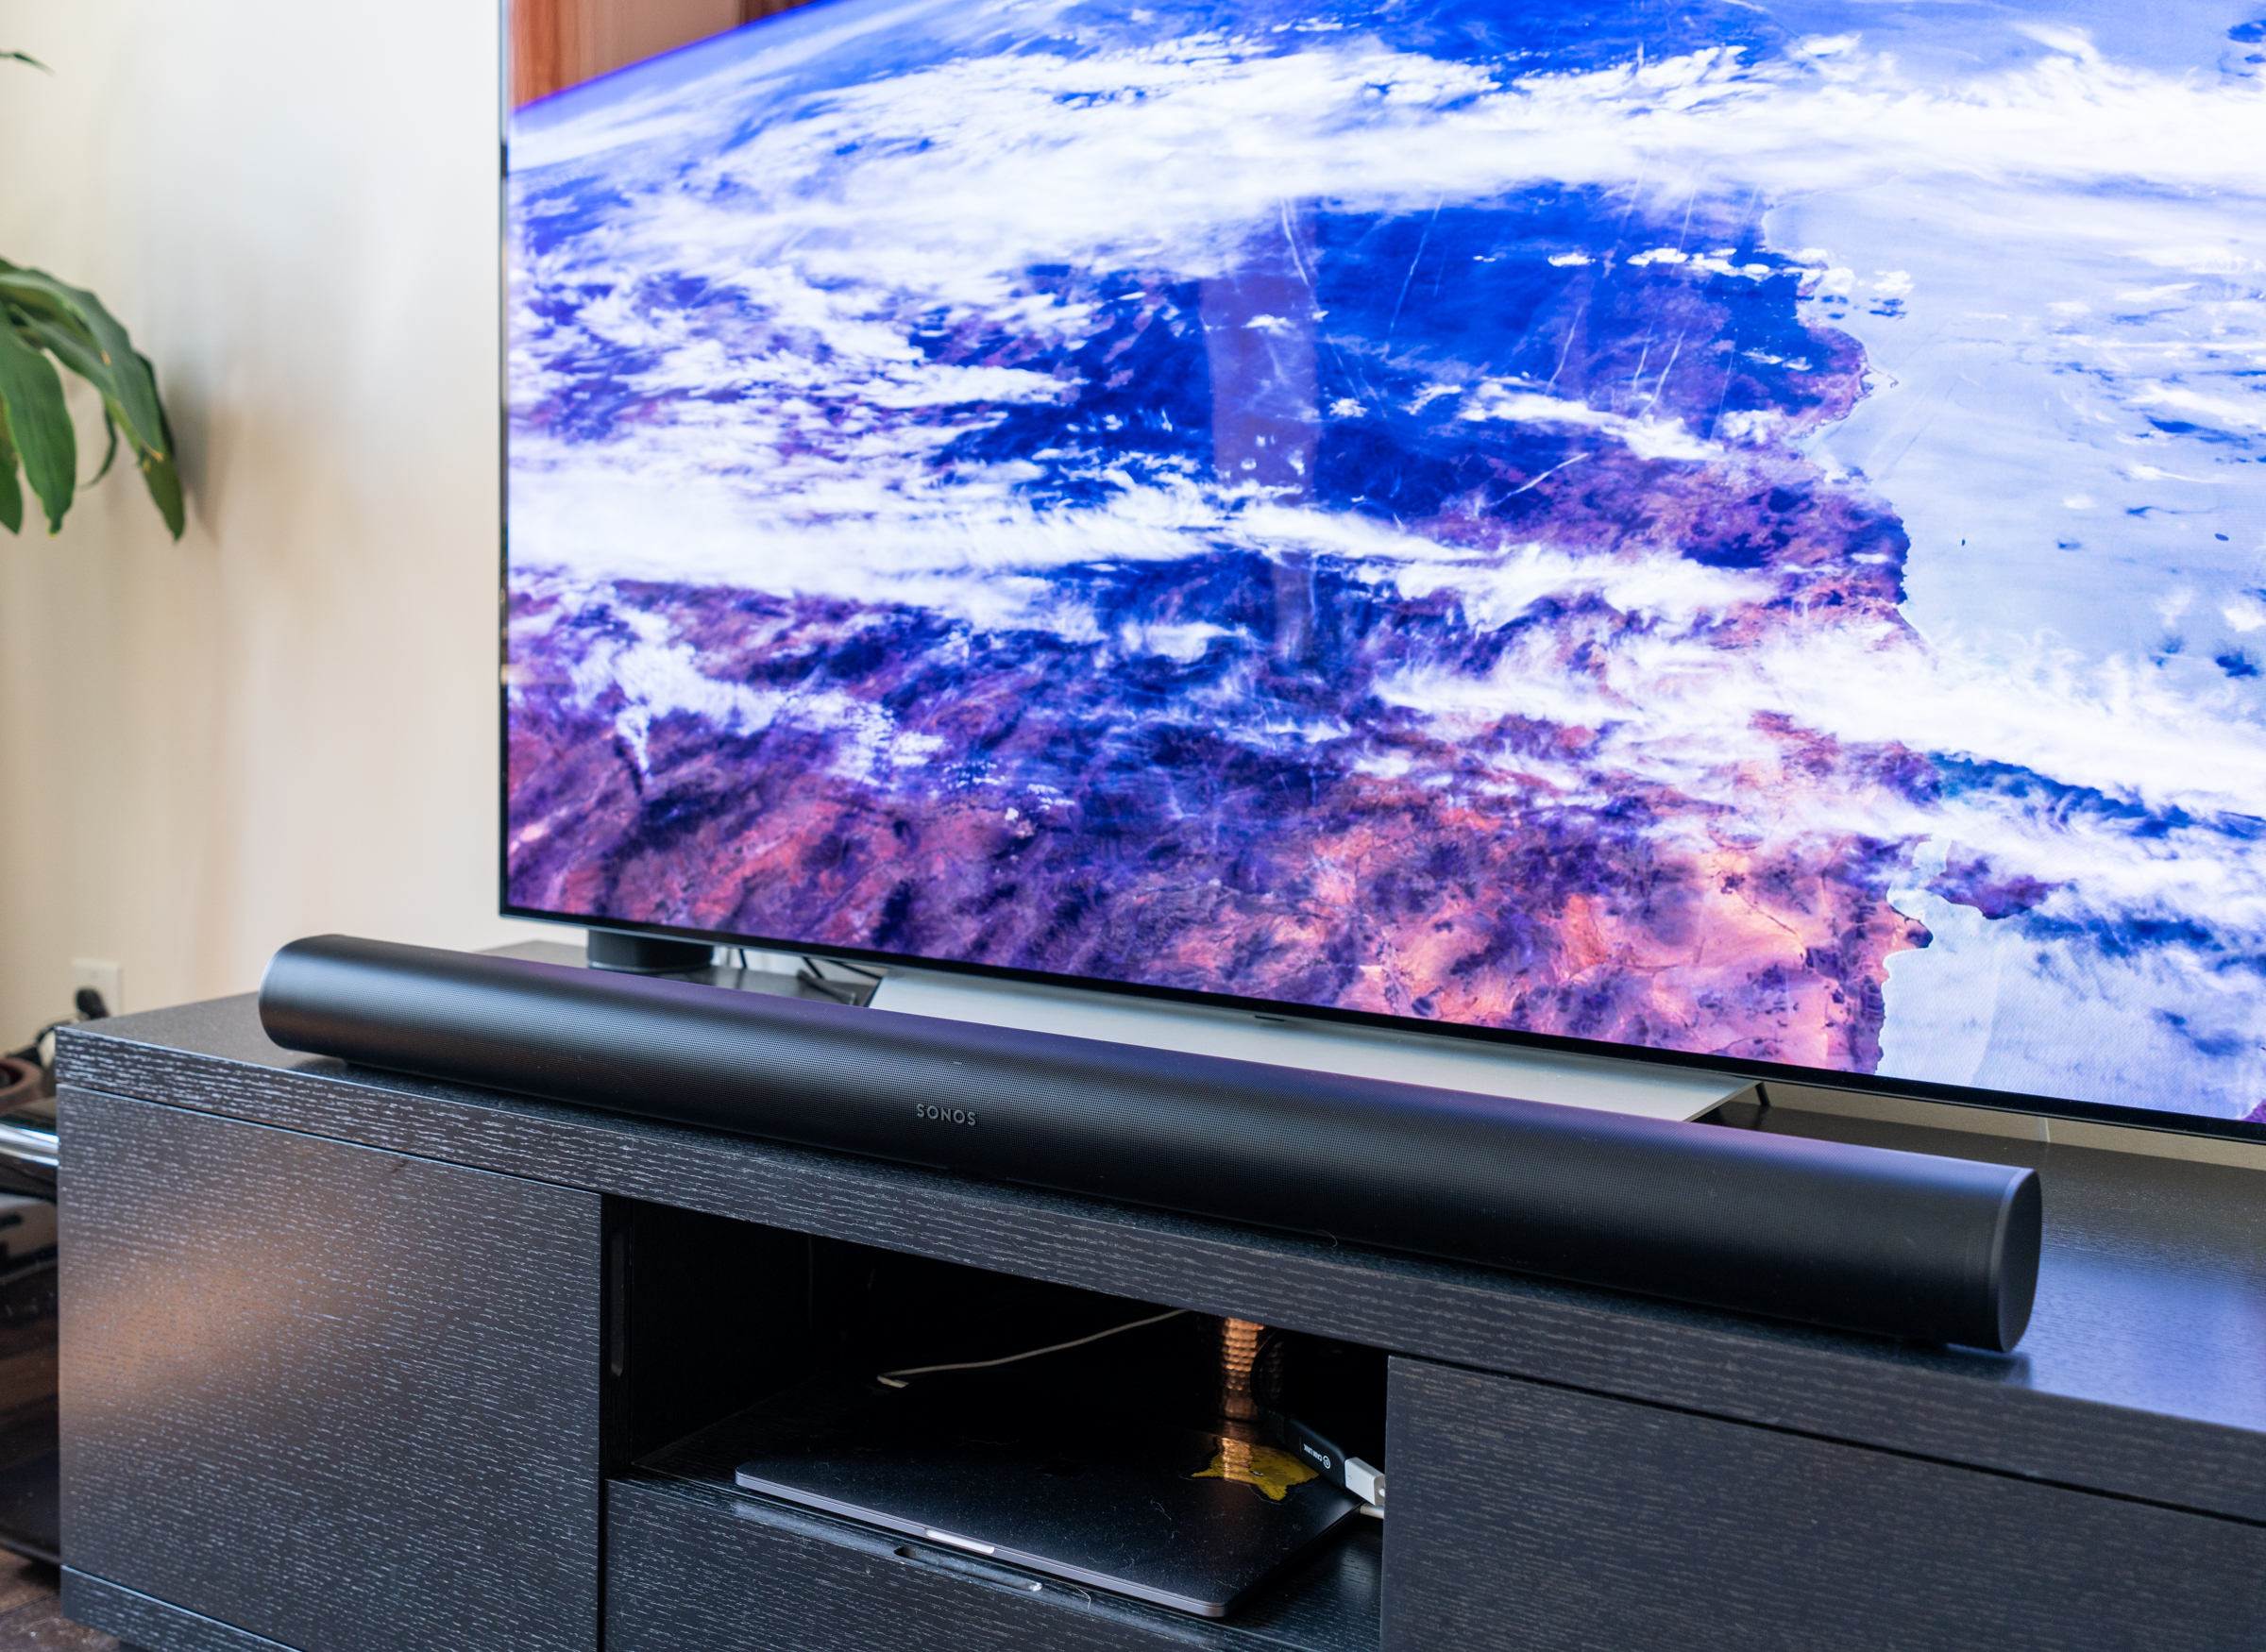 The Sonos Arc is an outstanding soundbar, on its own or with friends